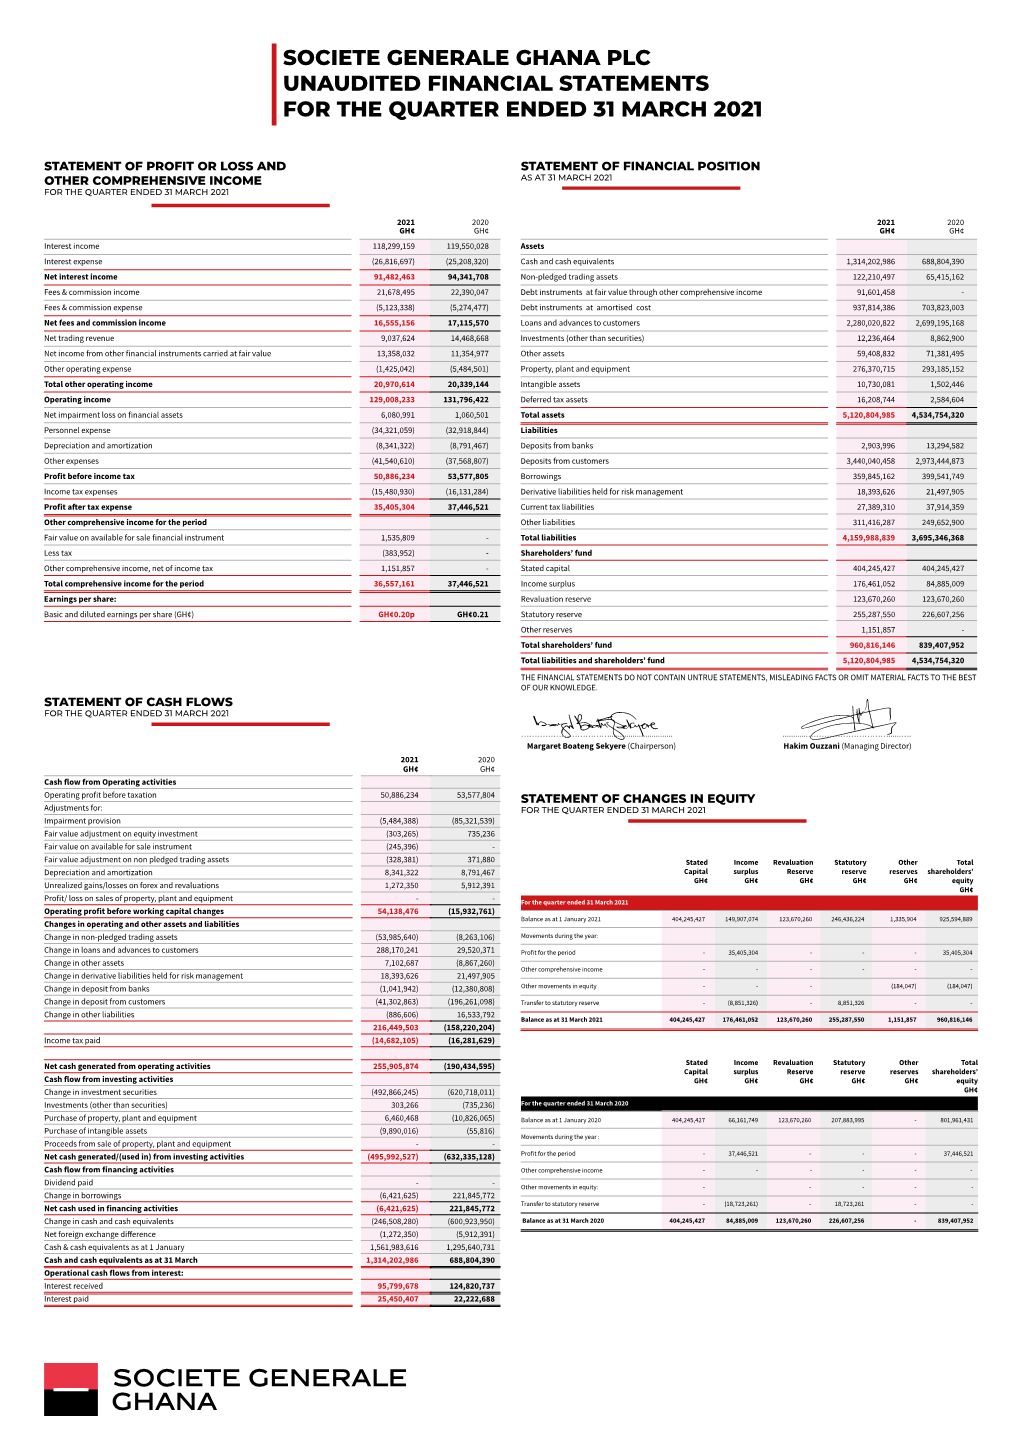 Societe Generale Ghana Plc Unaudited Financial Statements for the Quarter Ended 31 March 2021